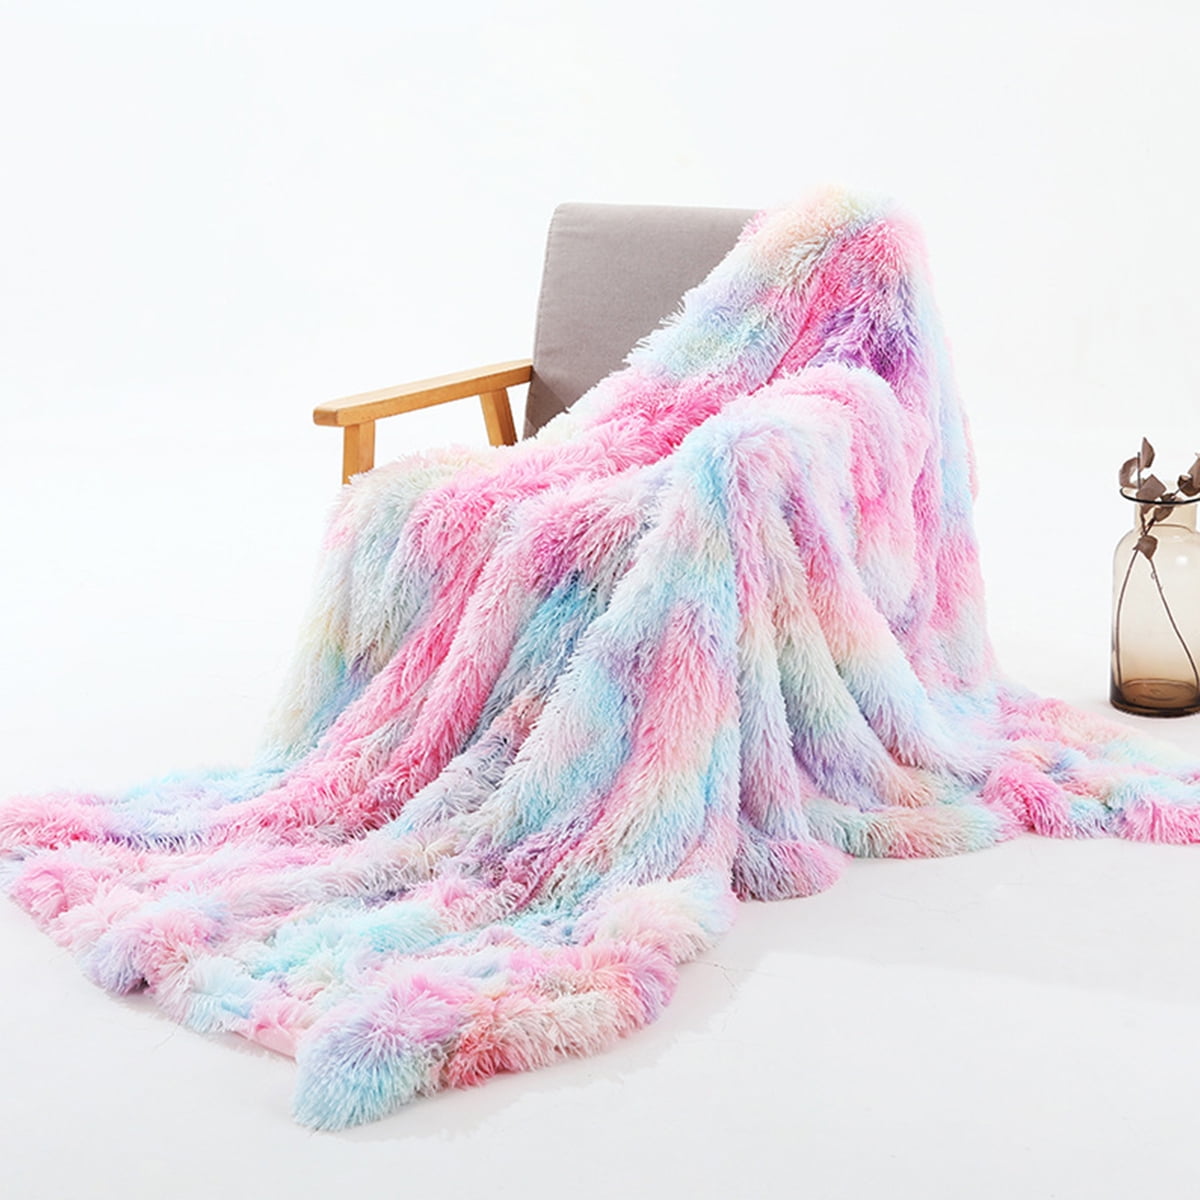 CANDY CRUSH BLANKET PLUSH THROW SOFT MICRO-RASCHEL SHERPA You Select the Style